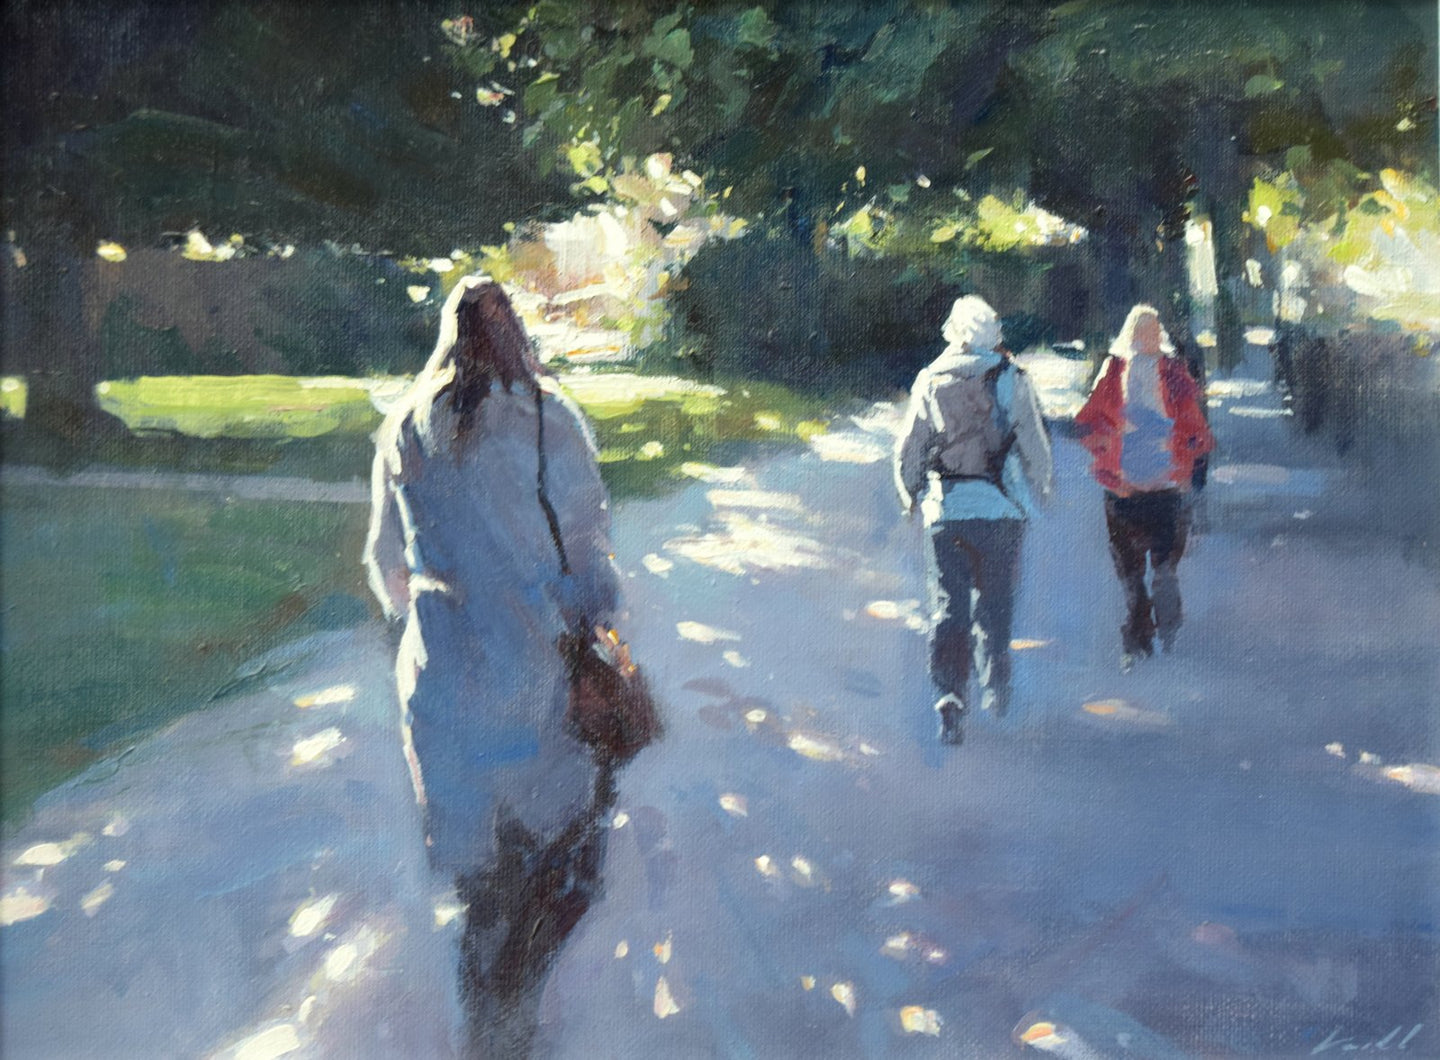 9 x 12 inch acrylic painting by Carl Knibb, with figures walking in a park, dappled sunlight throwing spots of sunlight on the path, as the title suggests, with edges of the figures lit-up.